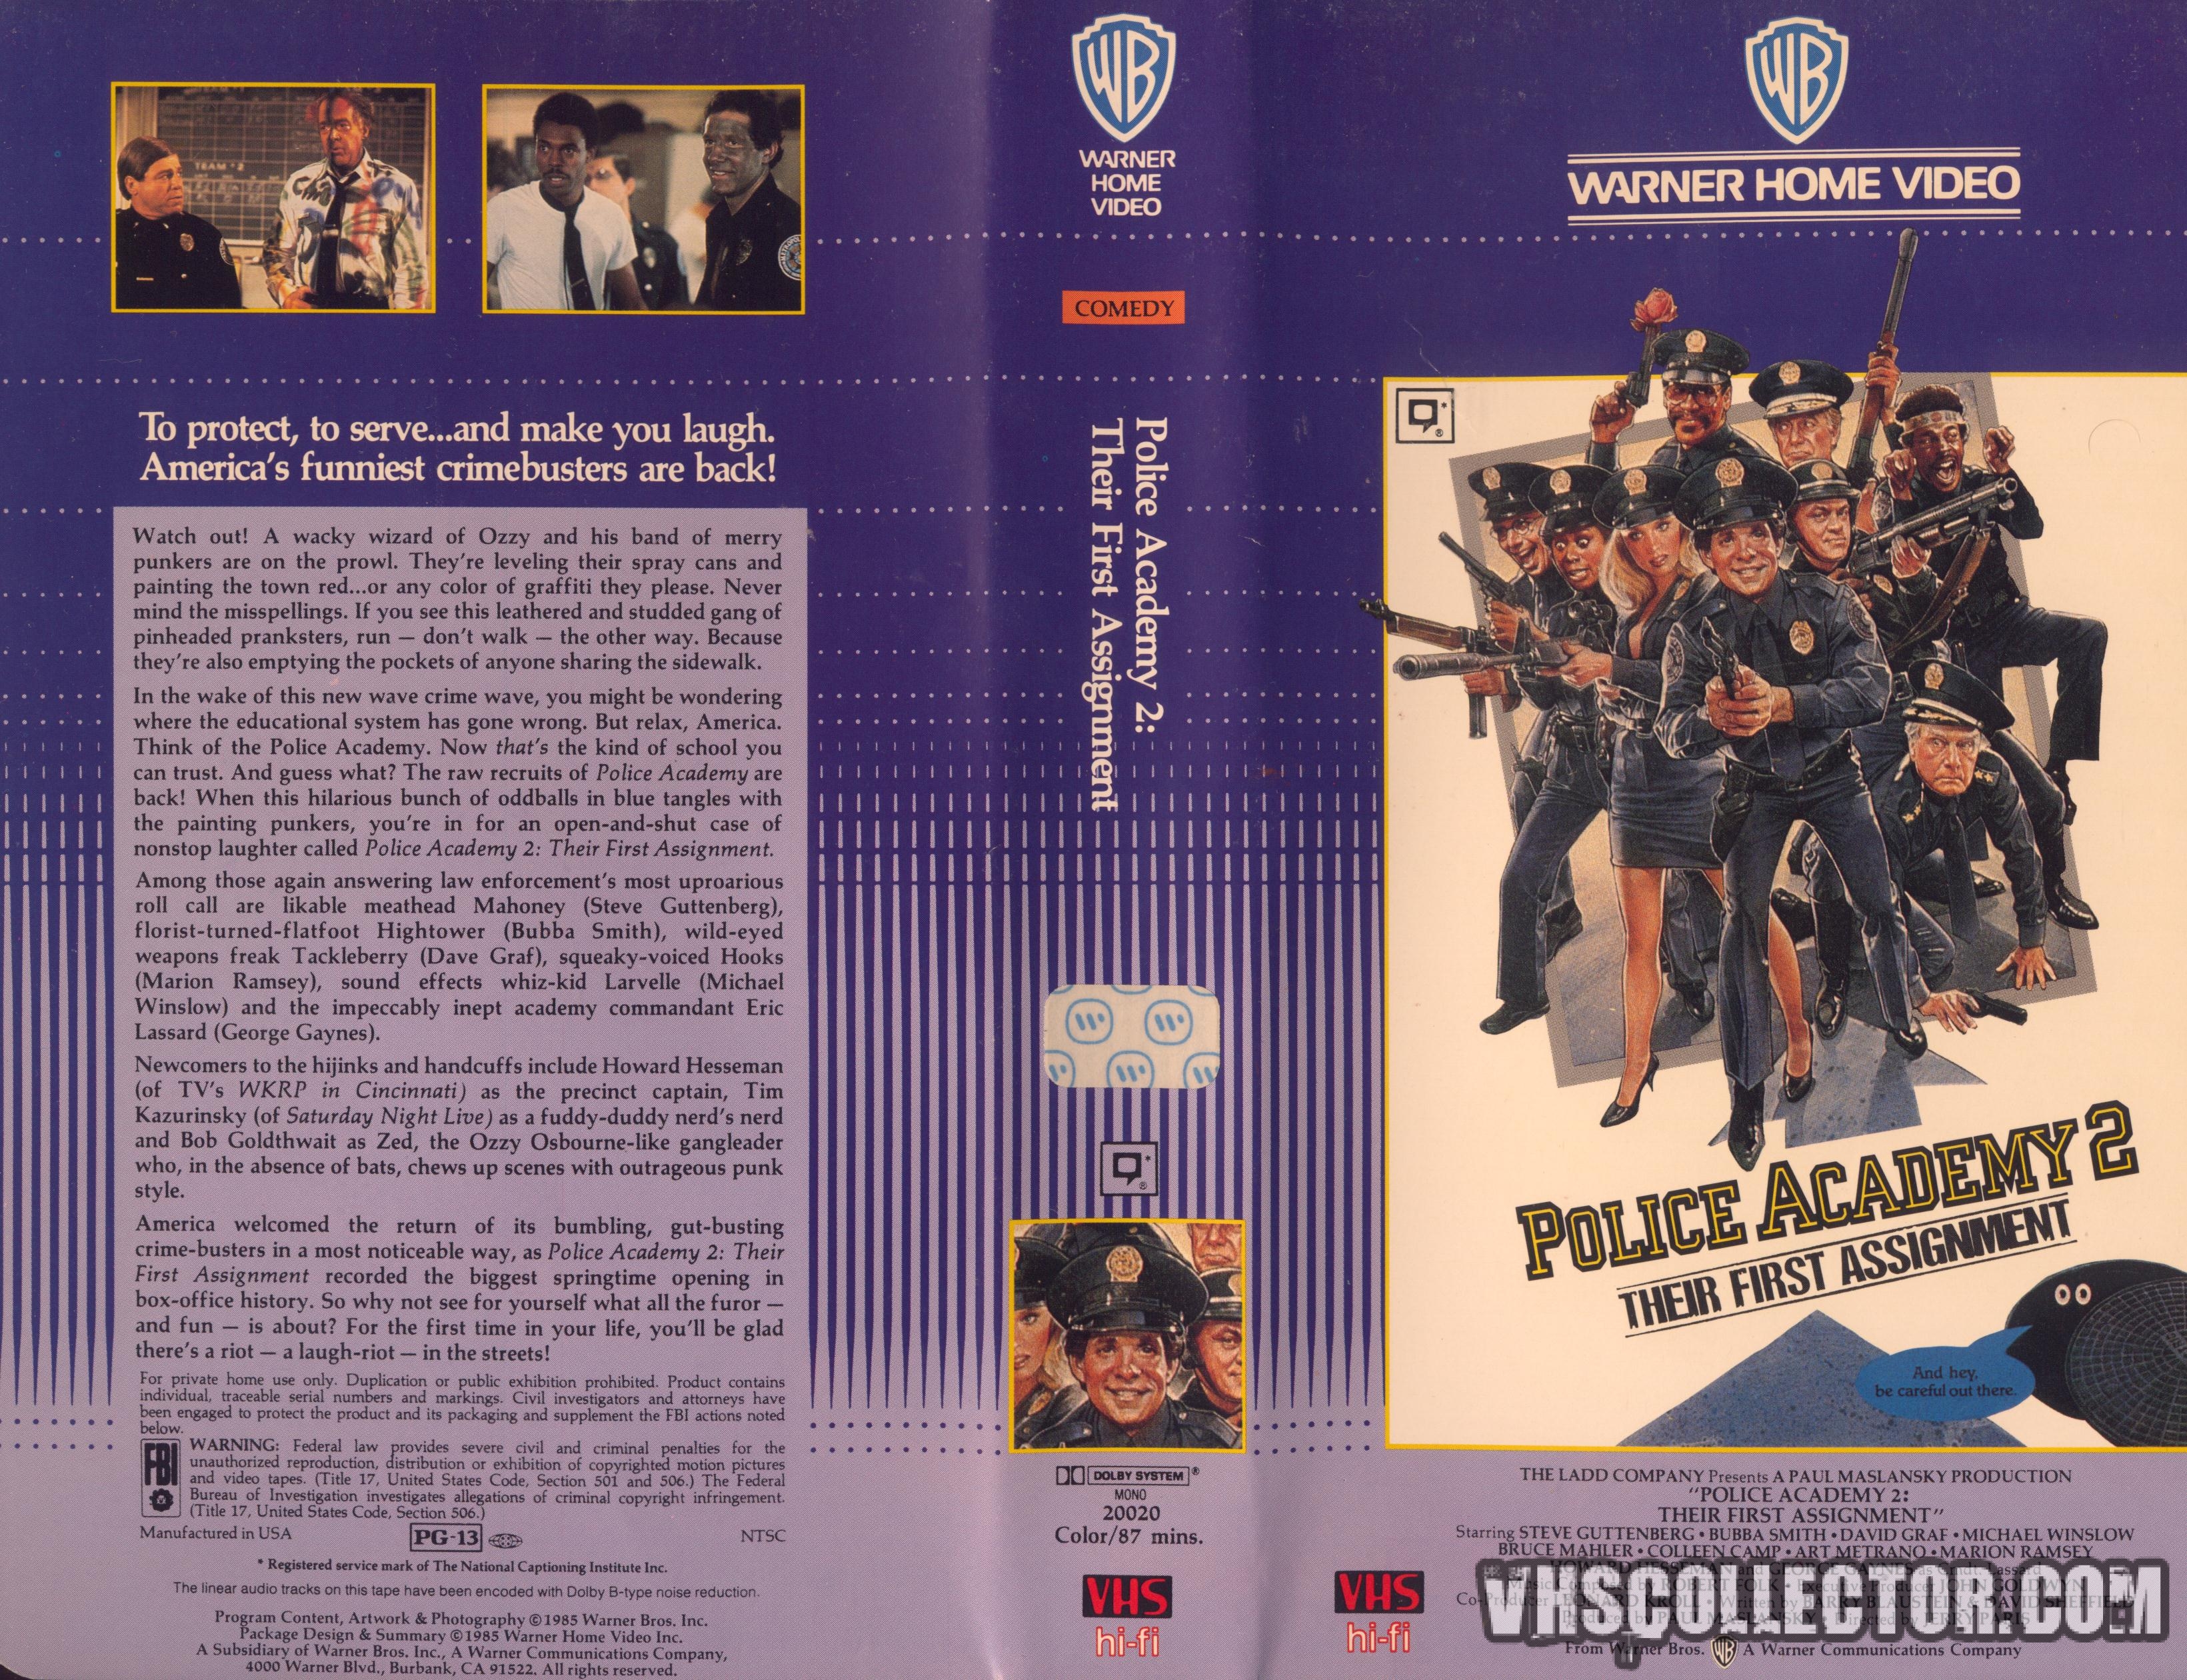 Amazing Police Academy 2: Their First Assignment Pictures & Backgrounds